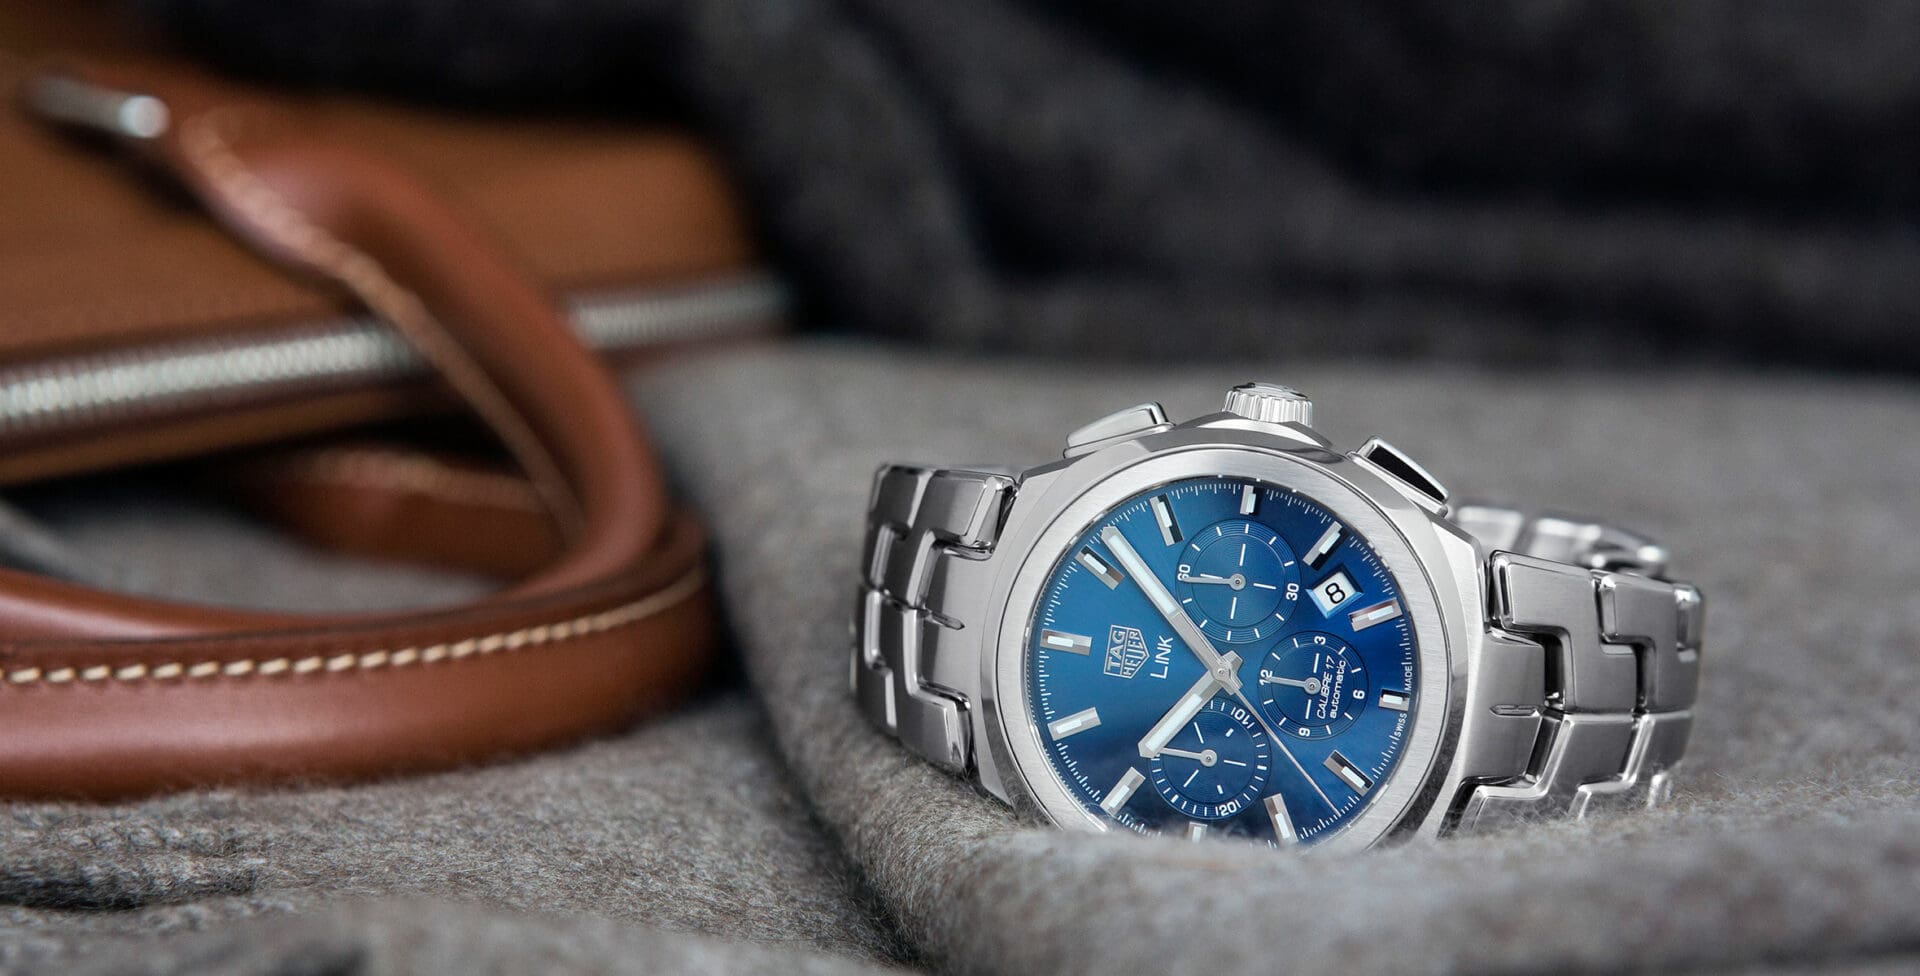 INTRODUCING: The sporty TAG Heuer Link Calibre 17 Chronograph